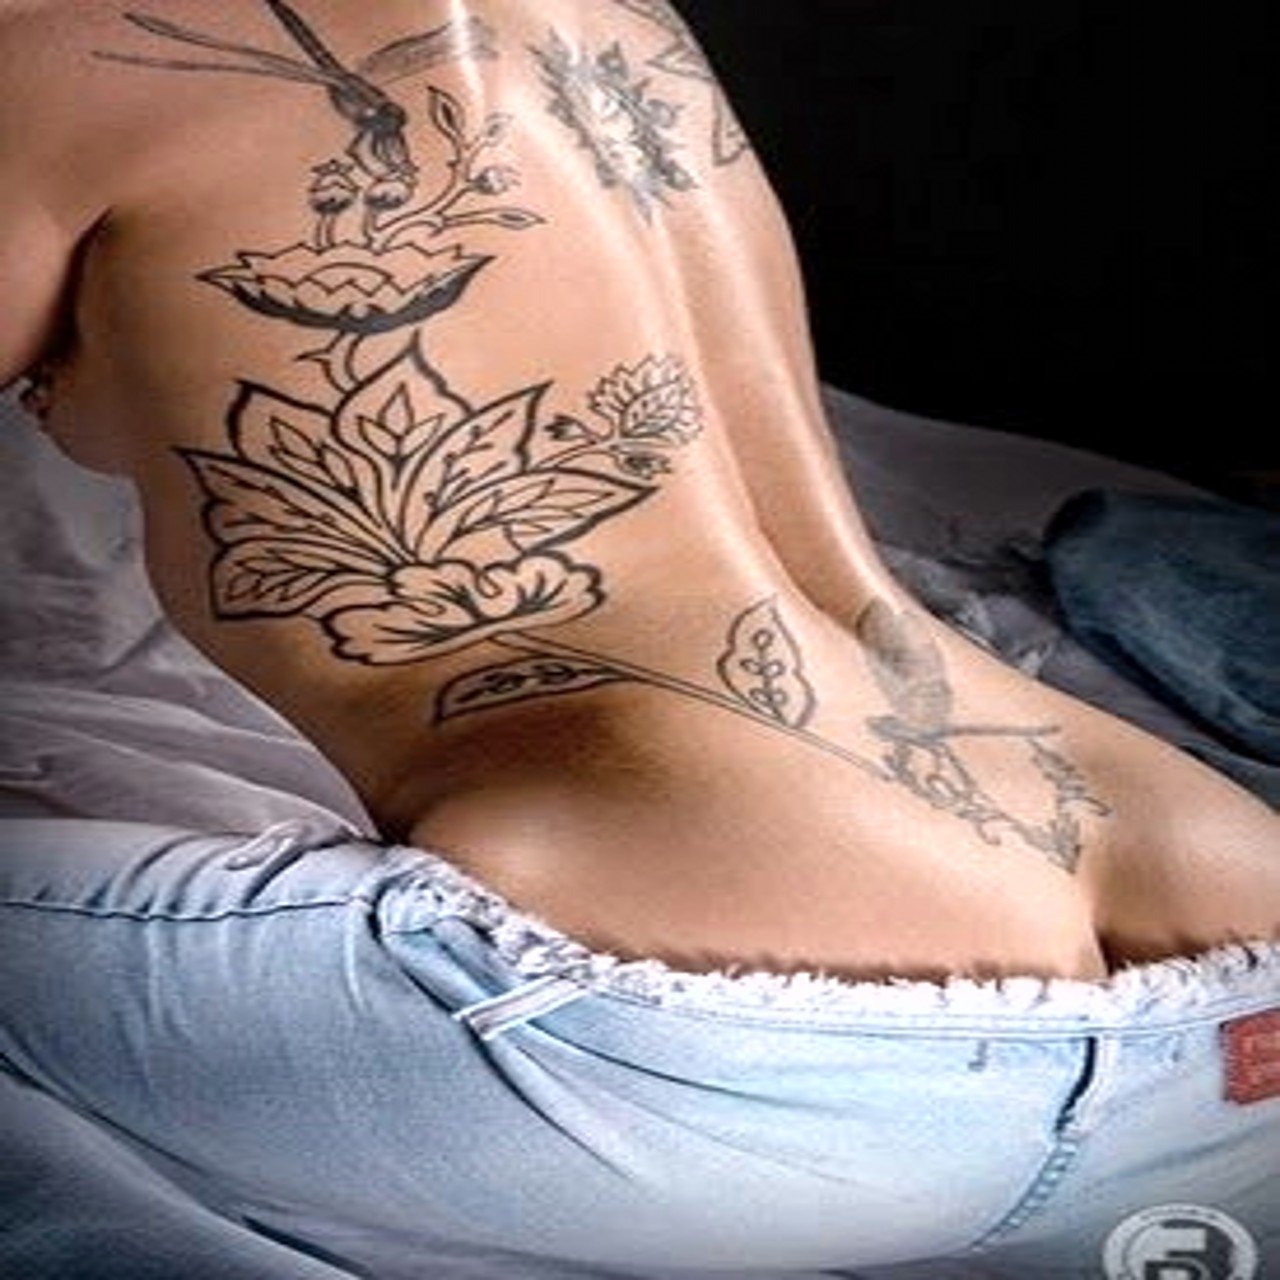 10 Fabulous Sexy Tattoo Ideas For Girls girl tattoos and designs page 114 2022